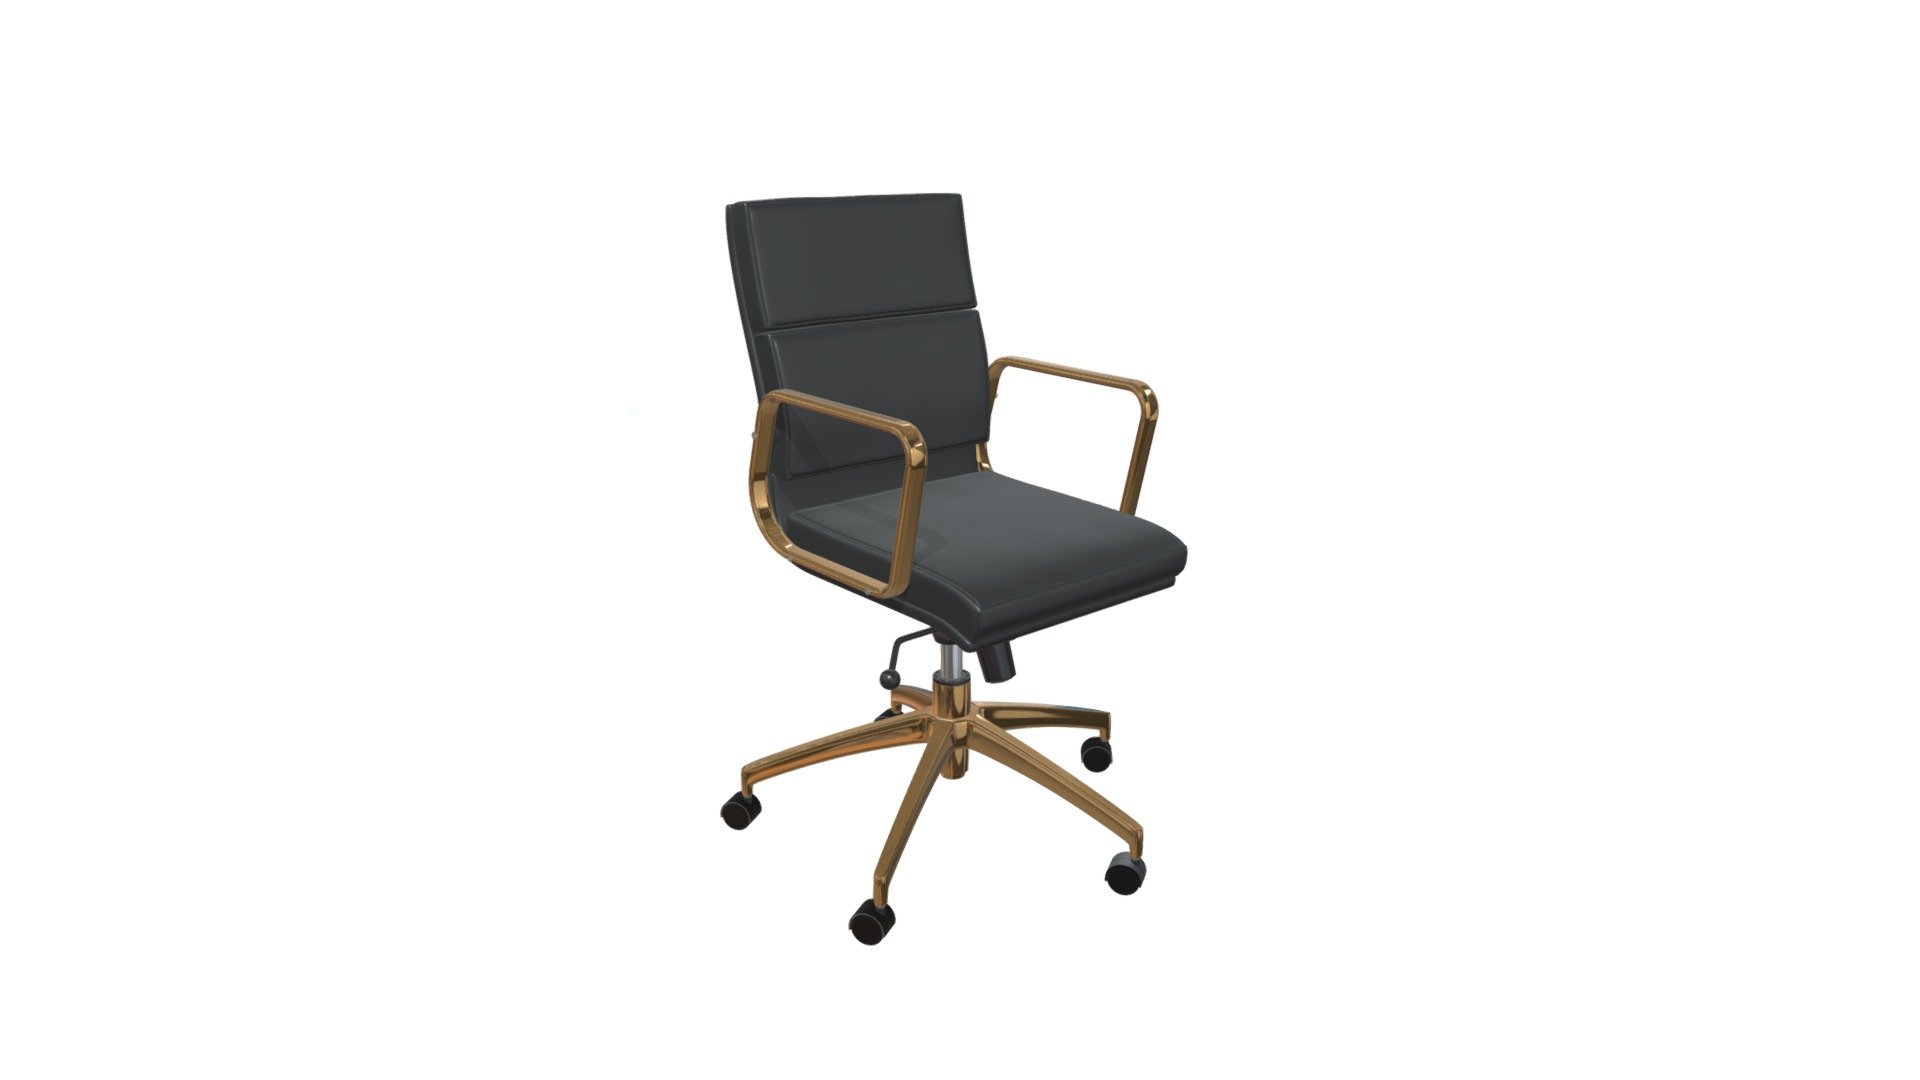 Dressed for success, this gorgeous office chair with its rich gold accents is the perfect choice for your high profile office space. Fully functional, it seat swivels and adjusts in height, while its sturdy casters keeps the agenda moving along. Pull it up to any desk for an instant promotion. https://zuomod.com/Scientist-Low-Back-Office-Chair-Blk-Gd - Scientist Low Back Office Chair Bk & Gd - 101017 - Buy Royalty Free 3D model by Zuo Modern (@zuo) 3d model